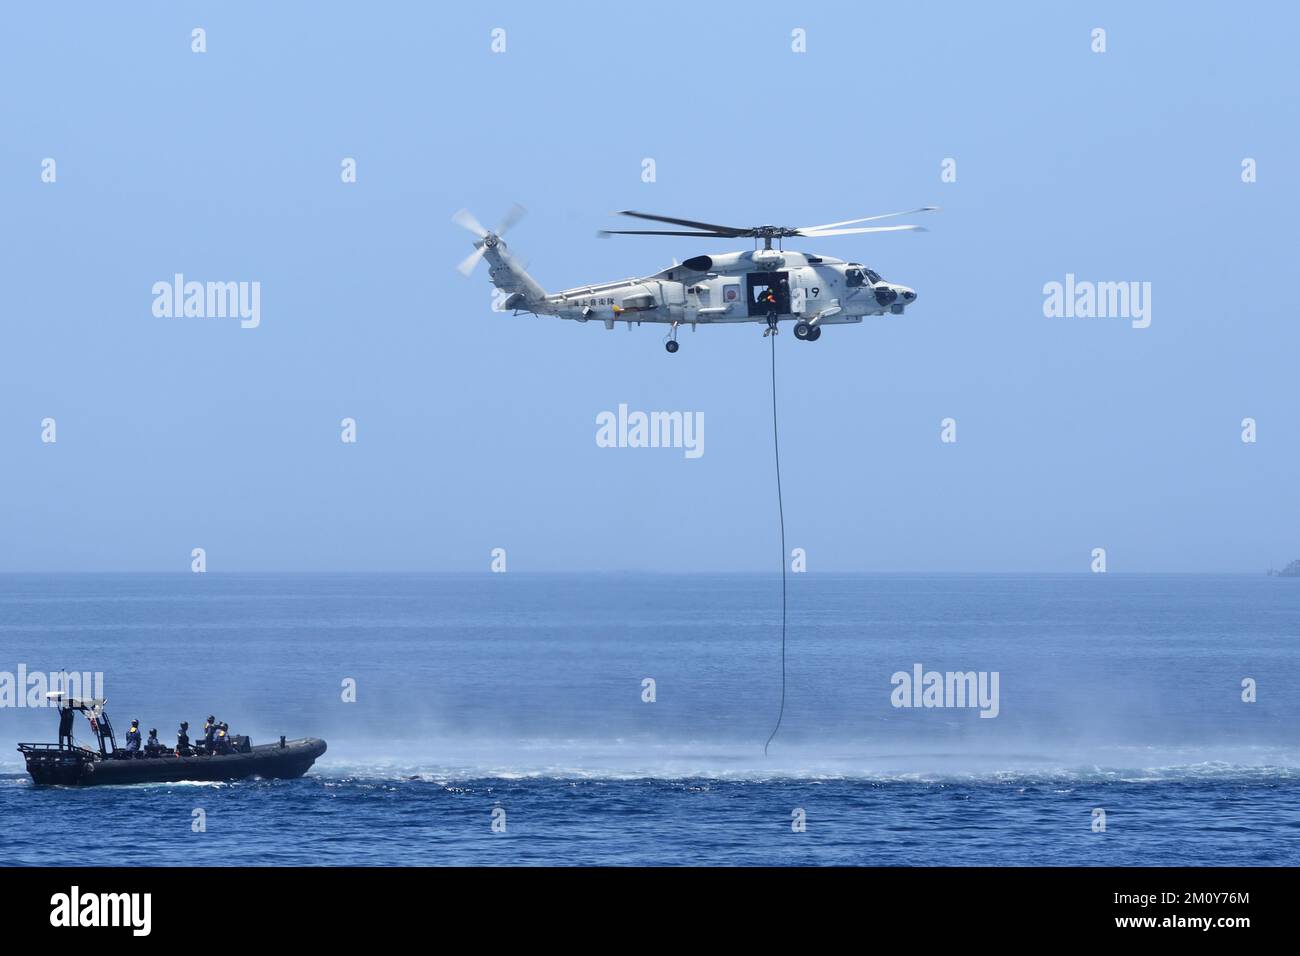 Kyoto Prefecture, Japan - July 25, 2014: Japan Maritime Self-Defense Force Sikorsky SH-60K Seahawk anti-submarine helicopter. Stock Photo